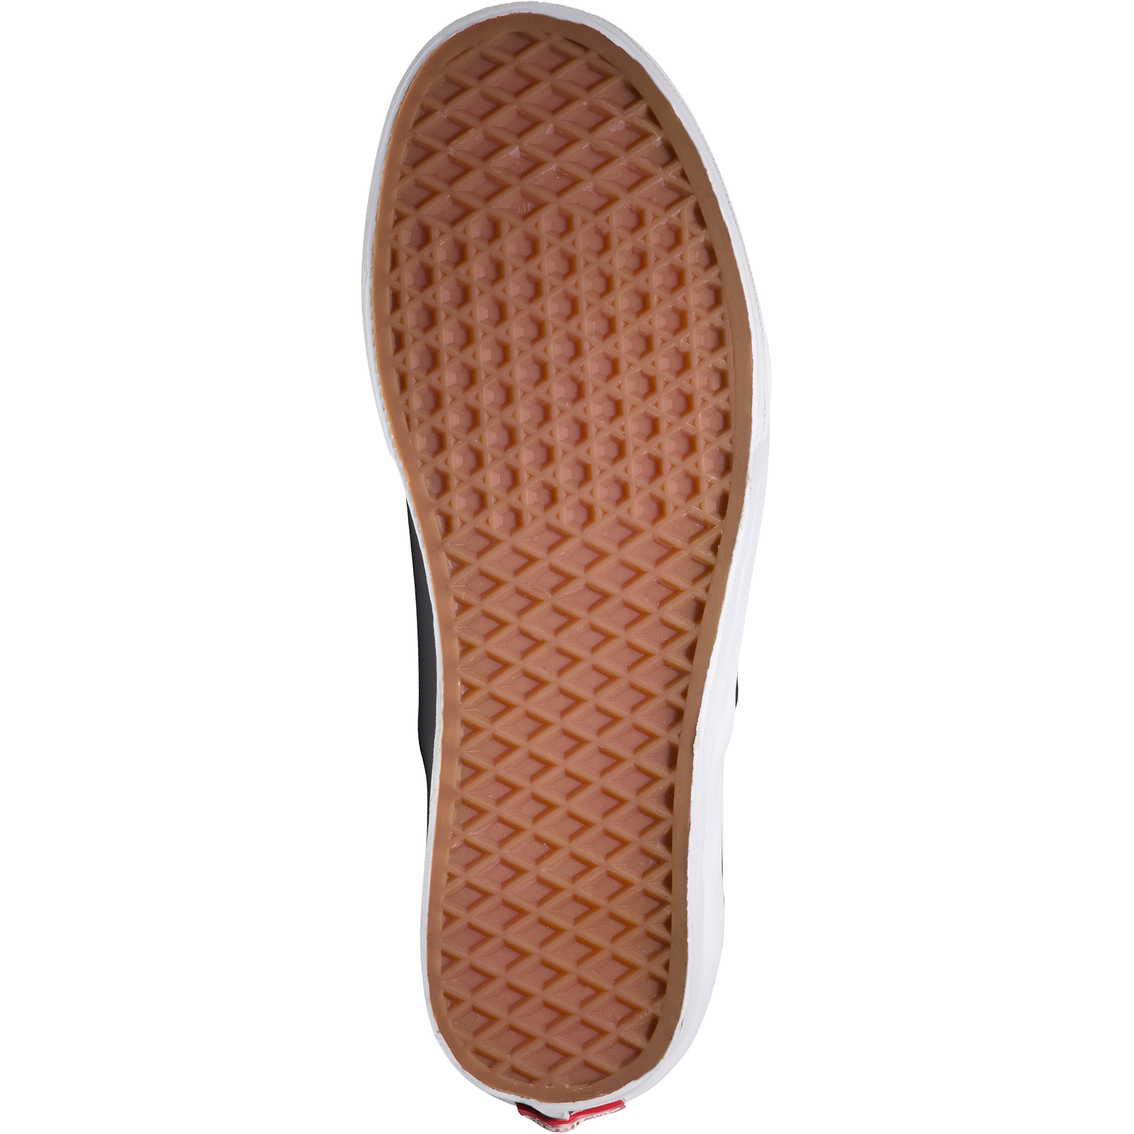 Vans Women's Classic Checkerboard Slip On Shoes - Image 5 of 5